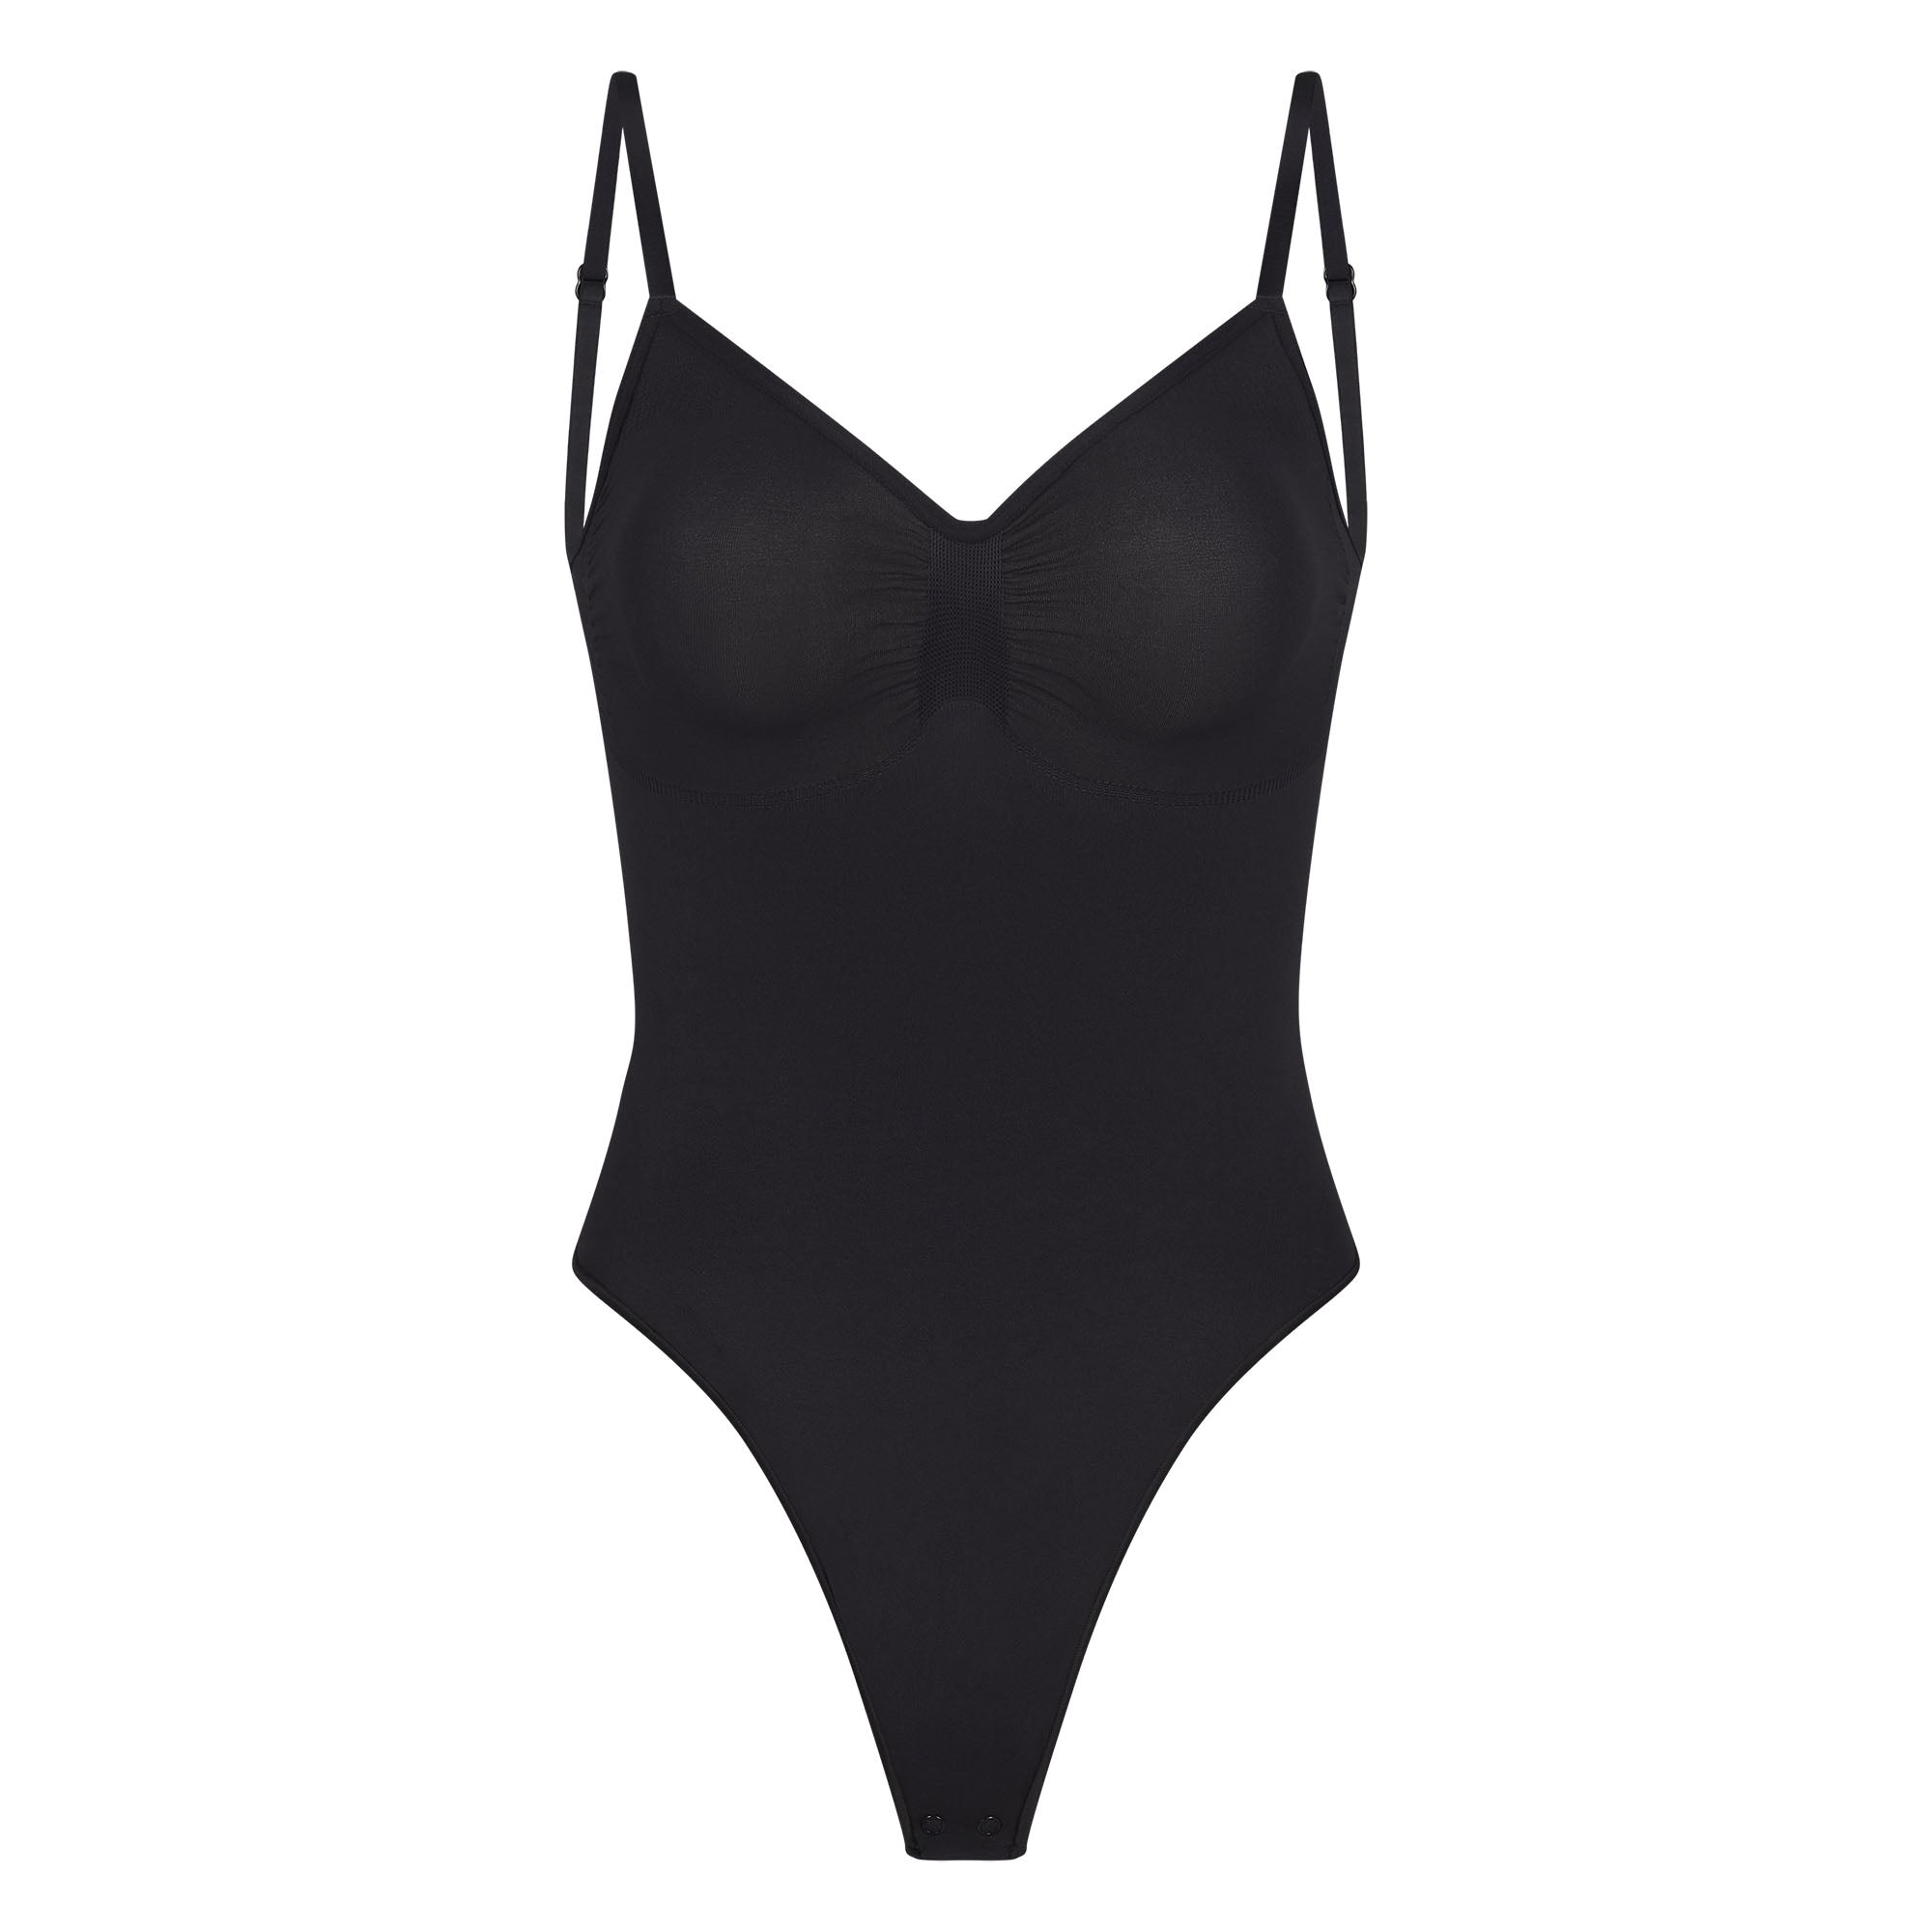 Buy SKIMS Neutral Seamless Sculpt Low-back Thong Bodysuit for